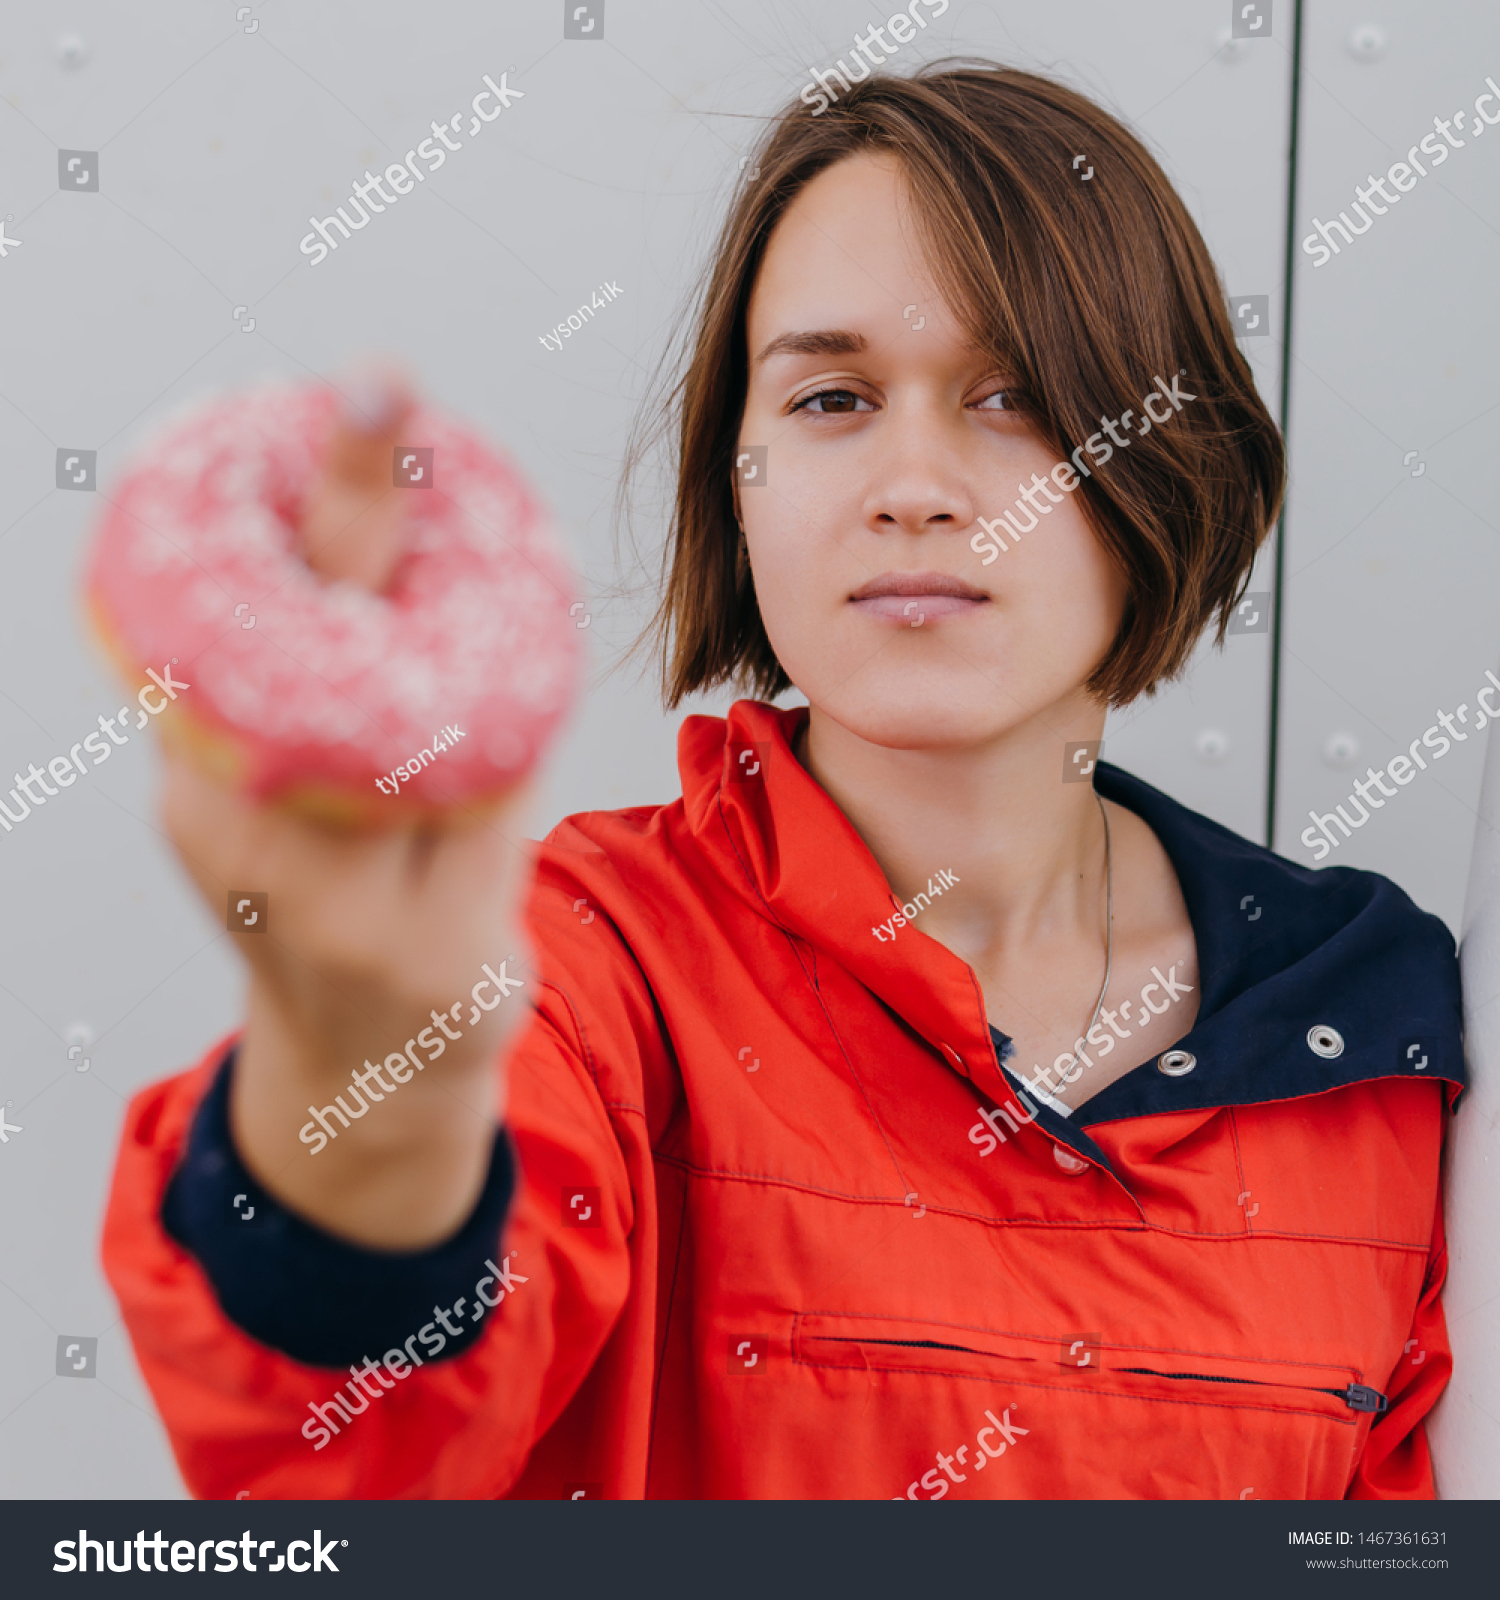 Beautiful woman showing fuck with donut Diet diet concept. Junk food, weight loss. #1467361631